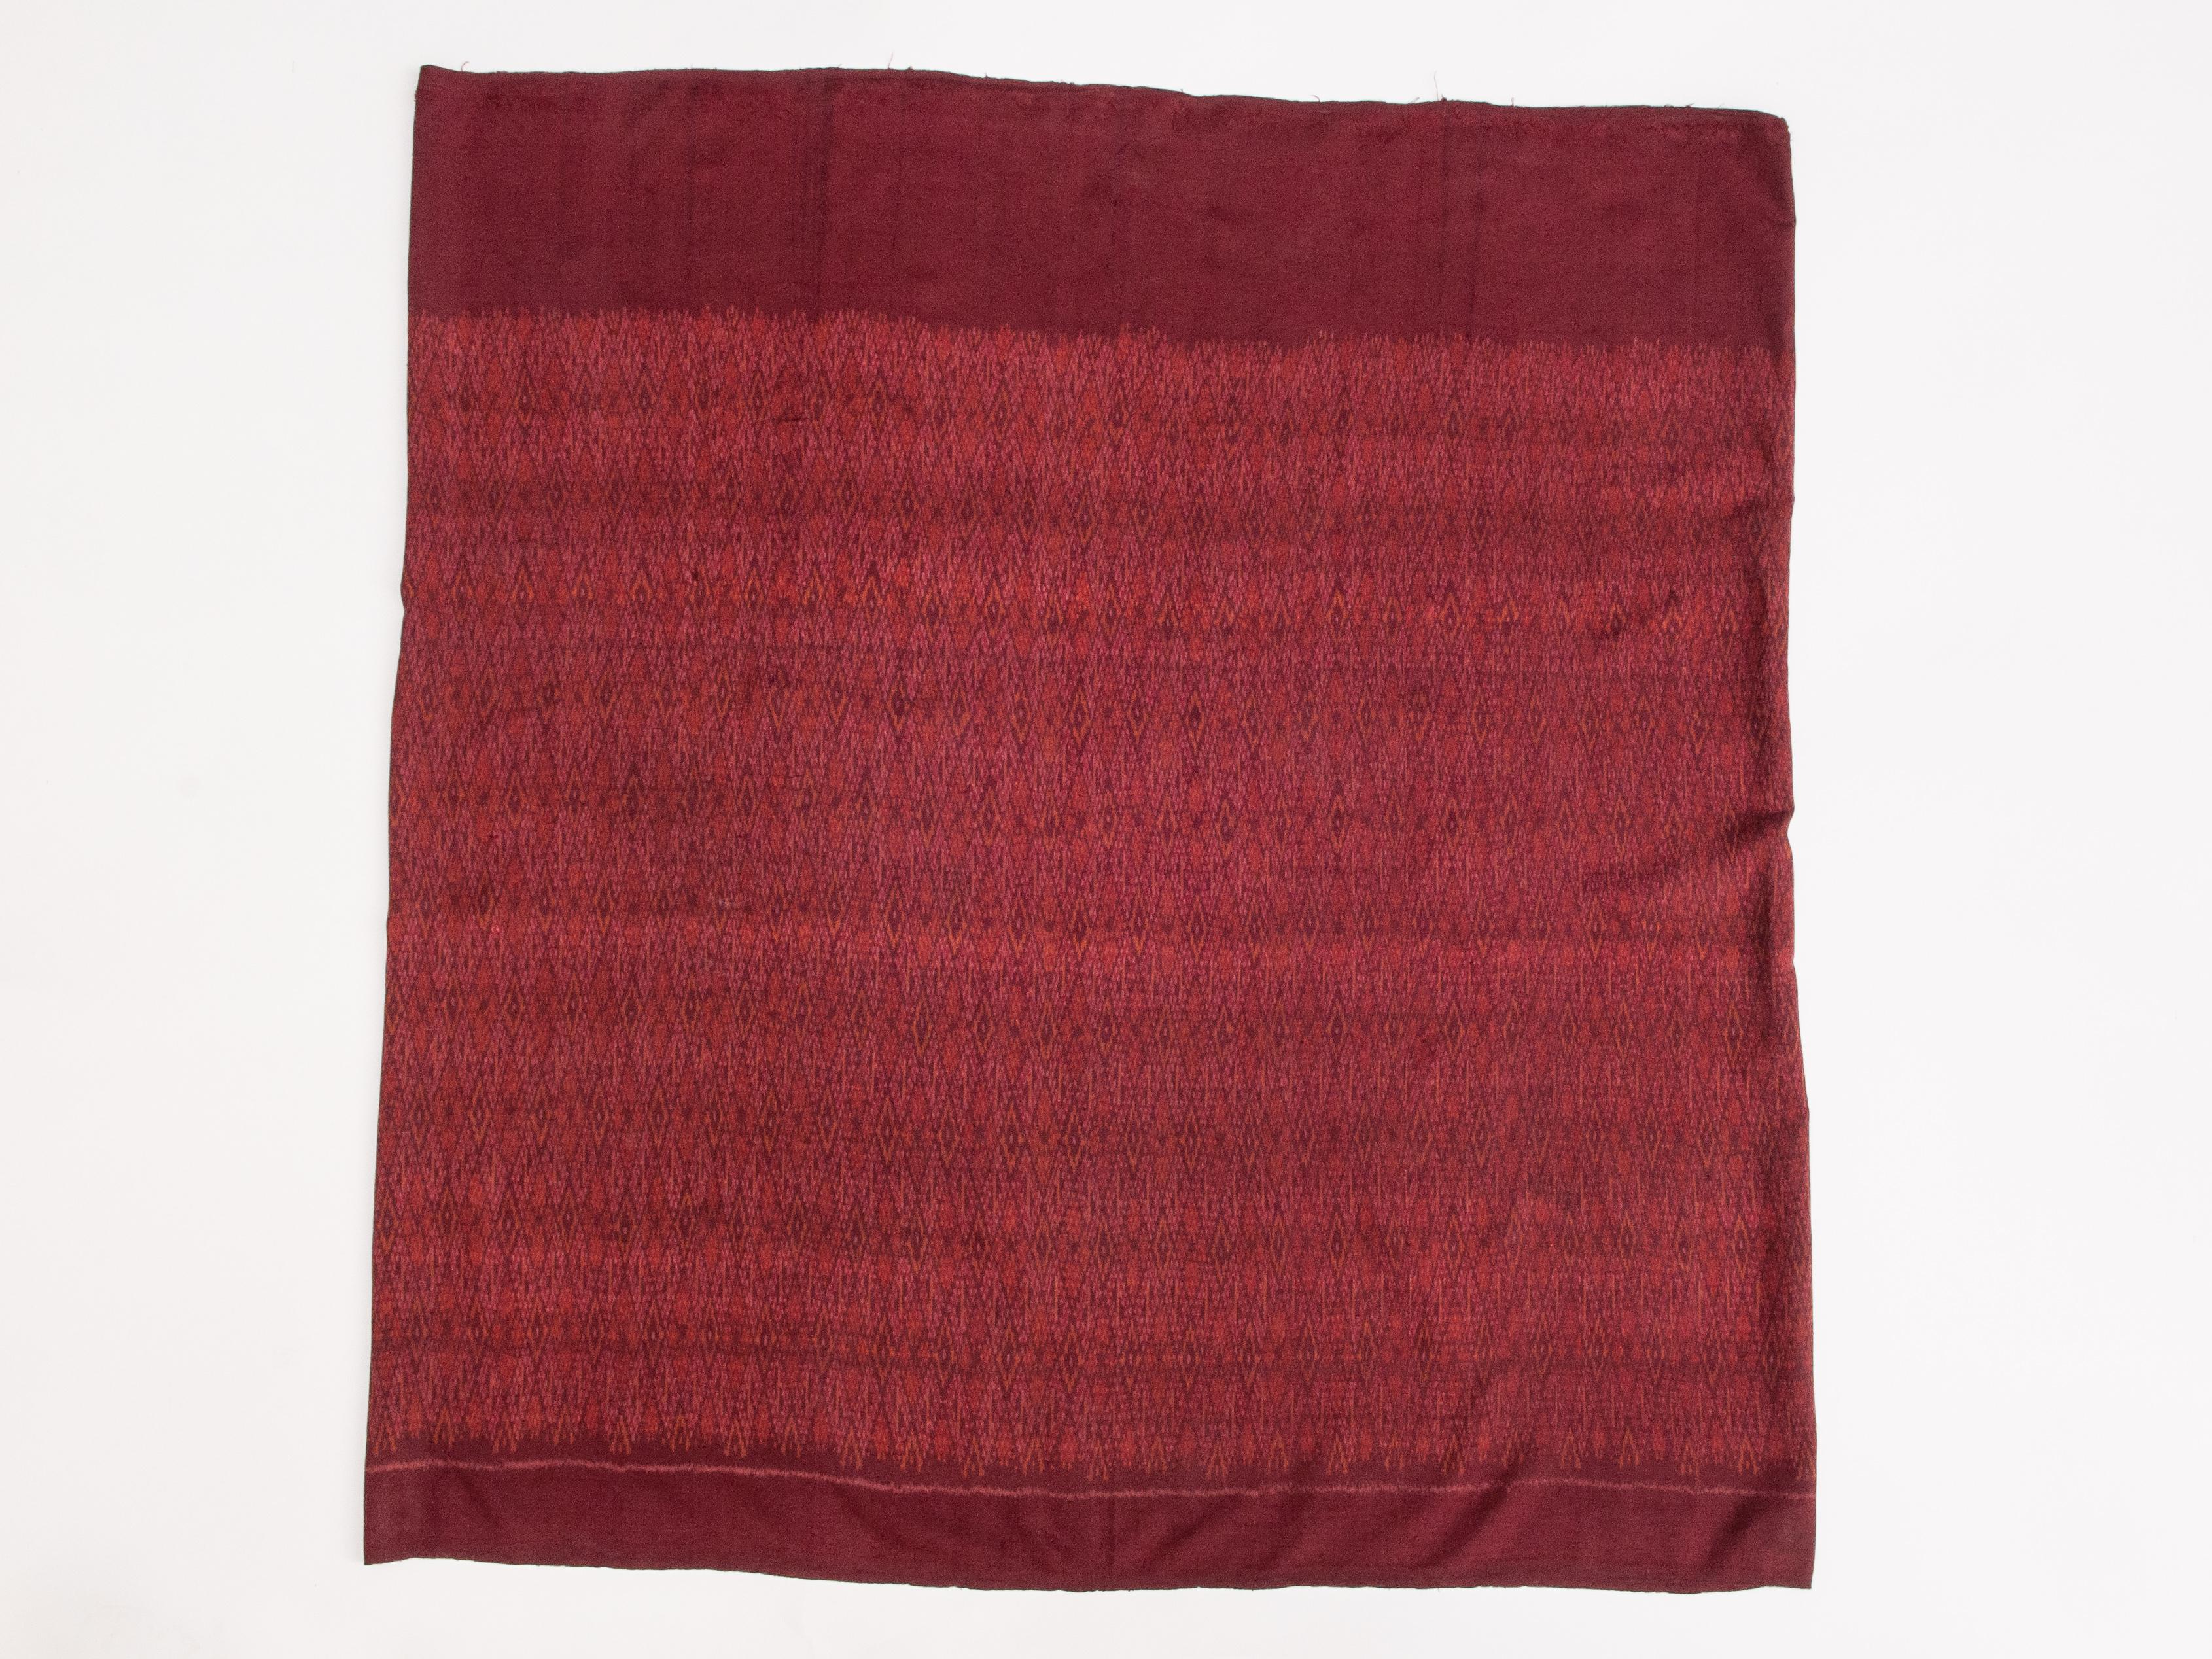 Vintage silk Ikat Sarong from East Thailand or Cambodia, mid-20th century.
This sarong comes from the border region of Thailand and Cambodia. The coloration and close repeating pattern are typical for this area. A single length of the handwoven